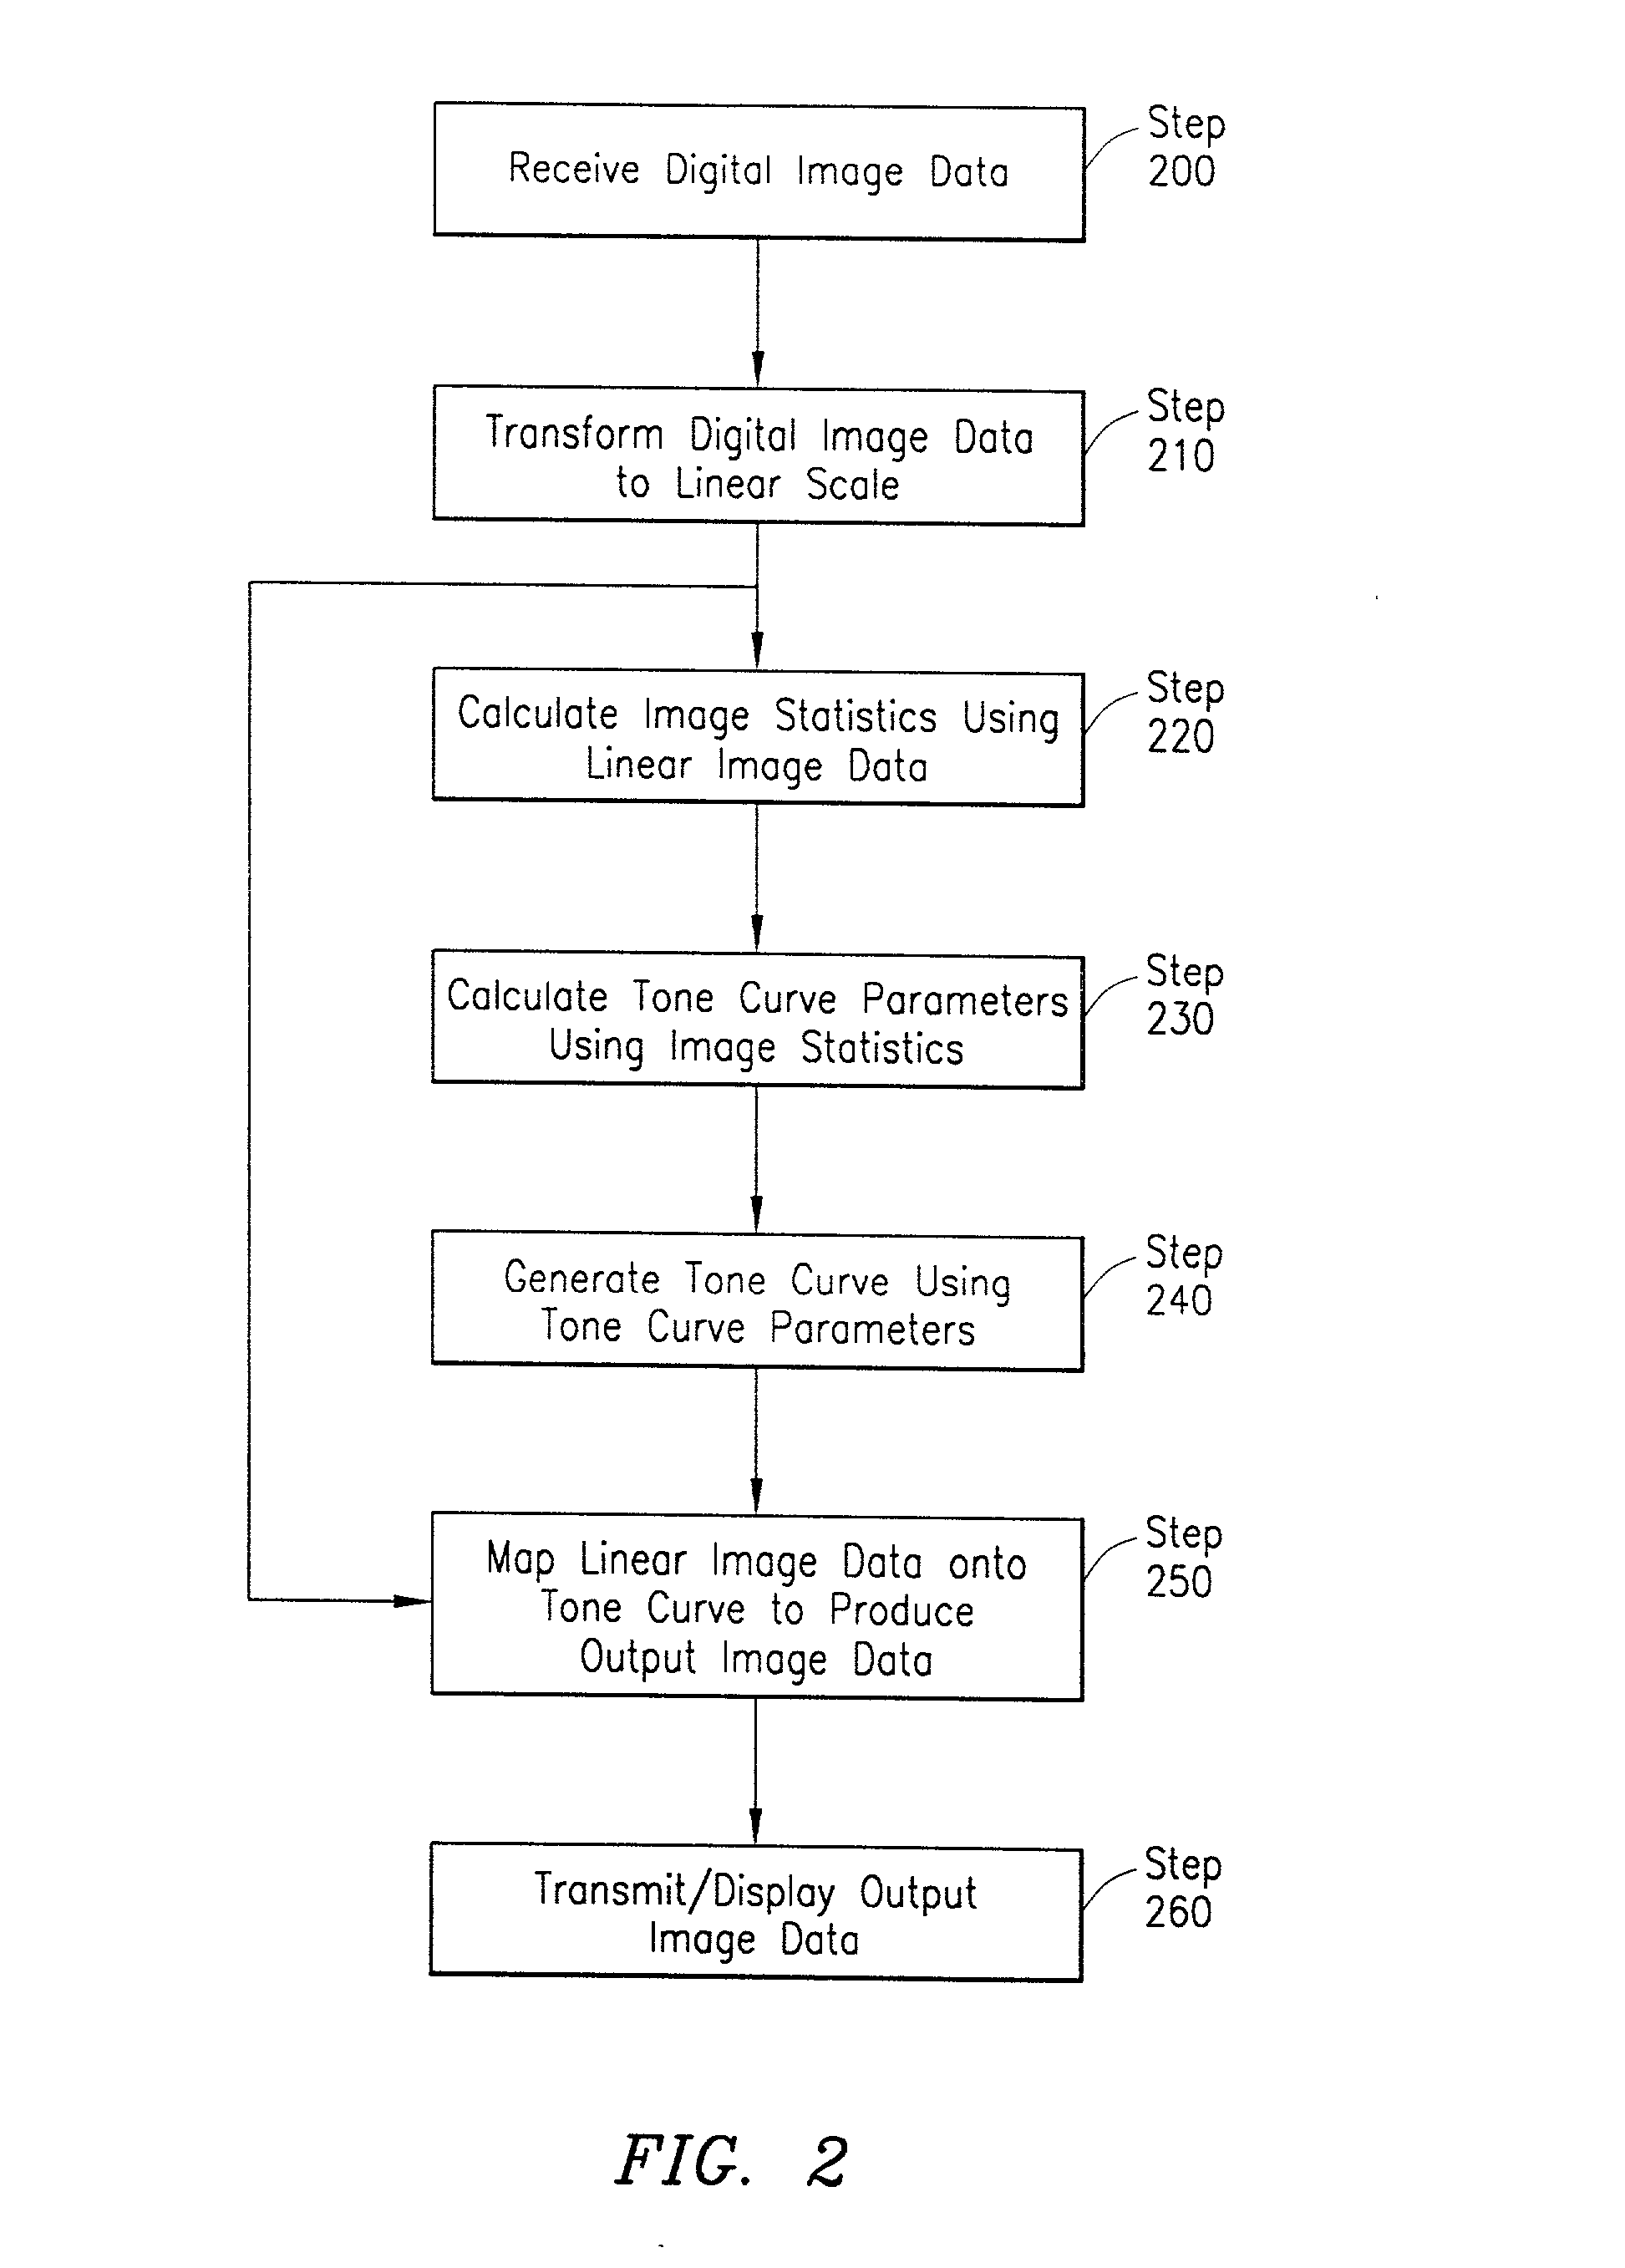 System and method for digital image tone mapping using an adaptive sigmoidal function based on perceptual preference guidelines